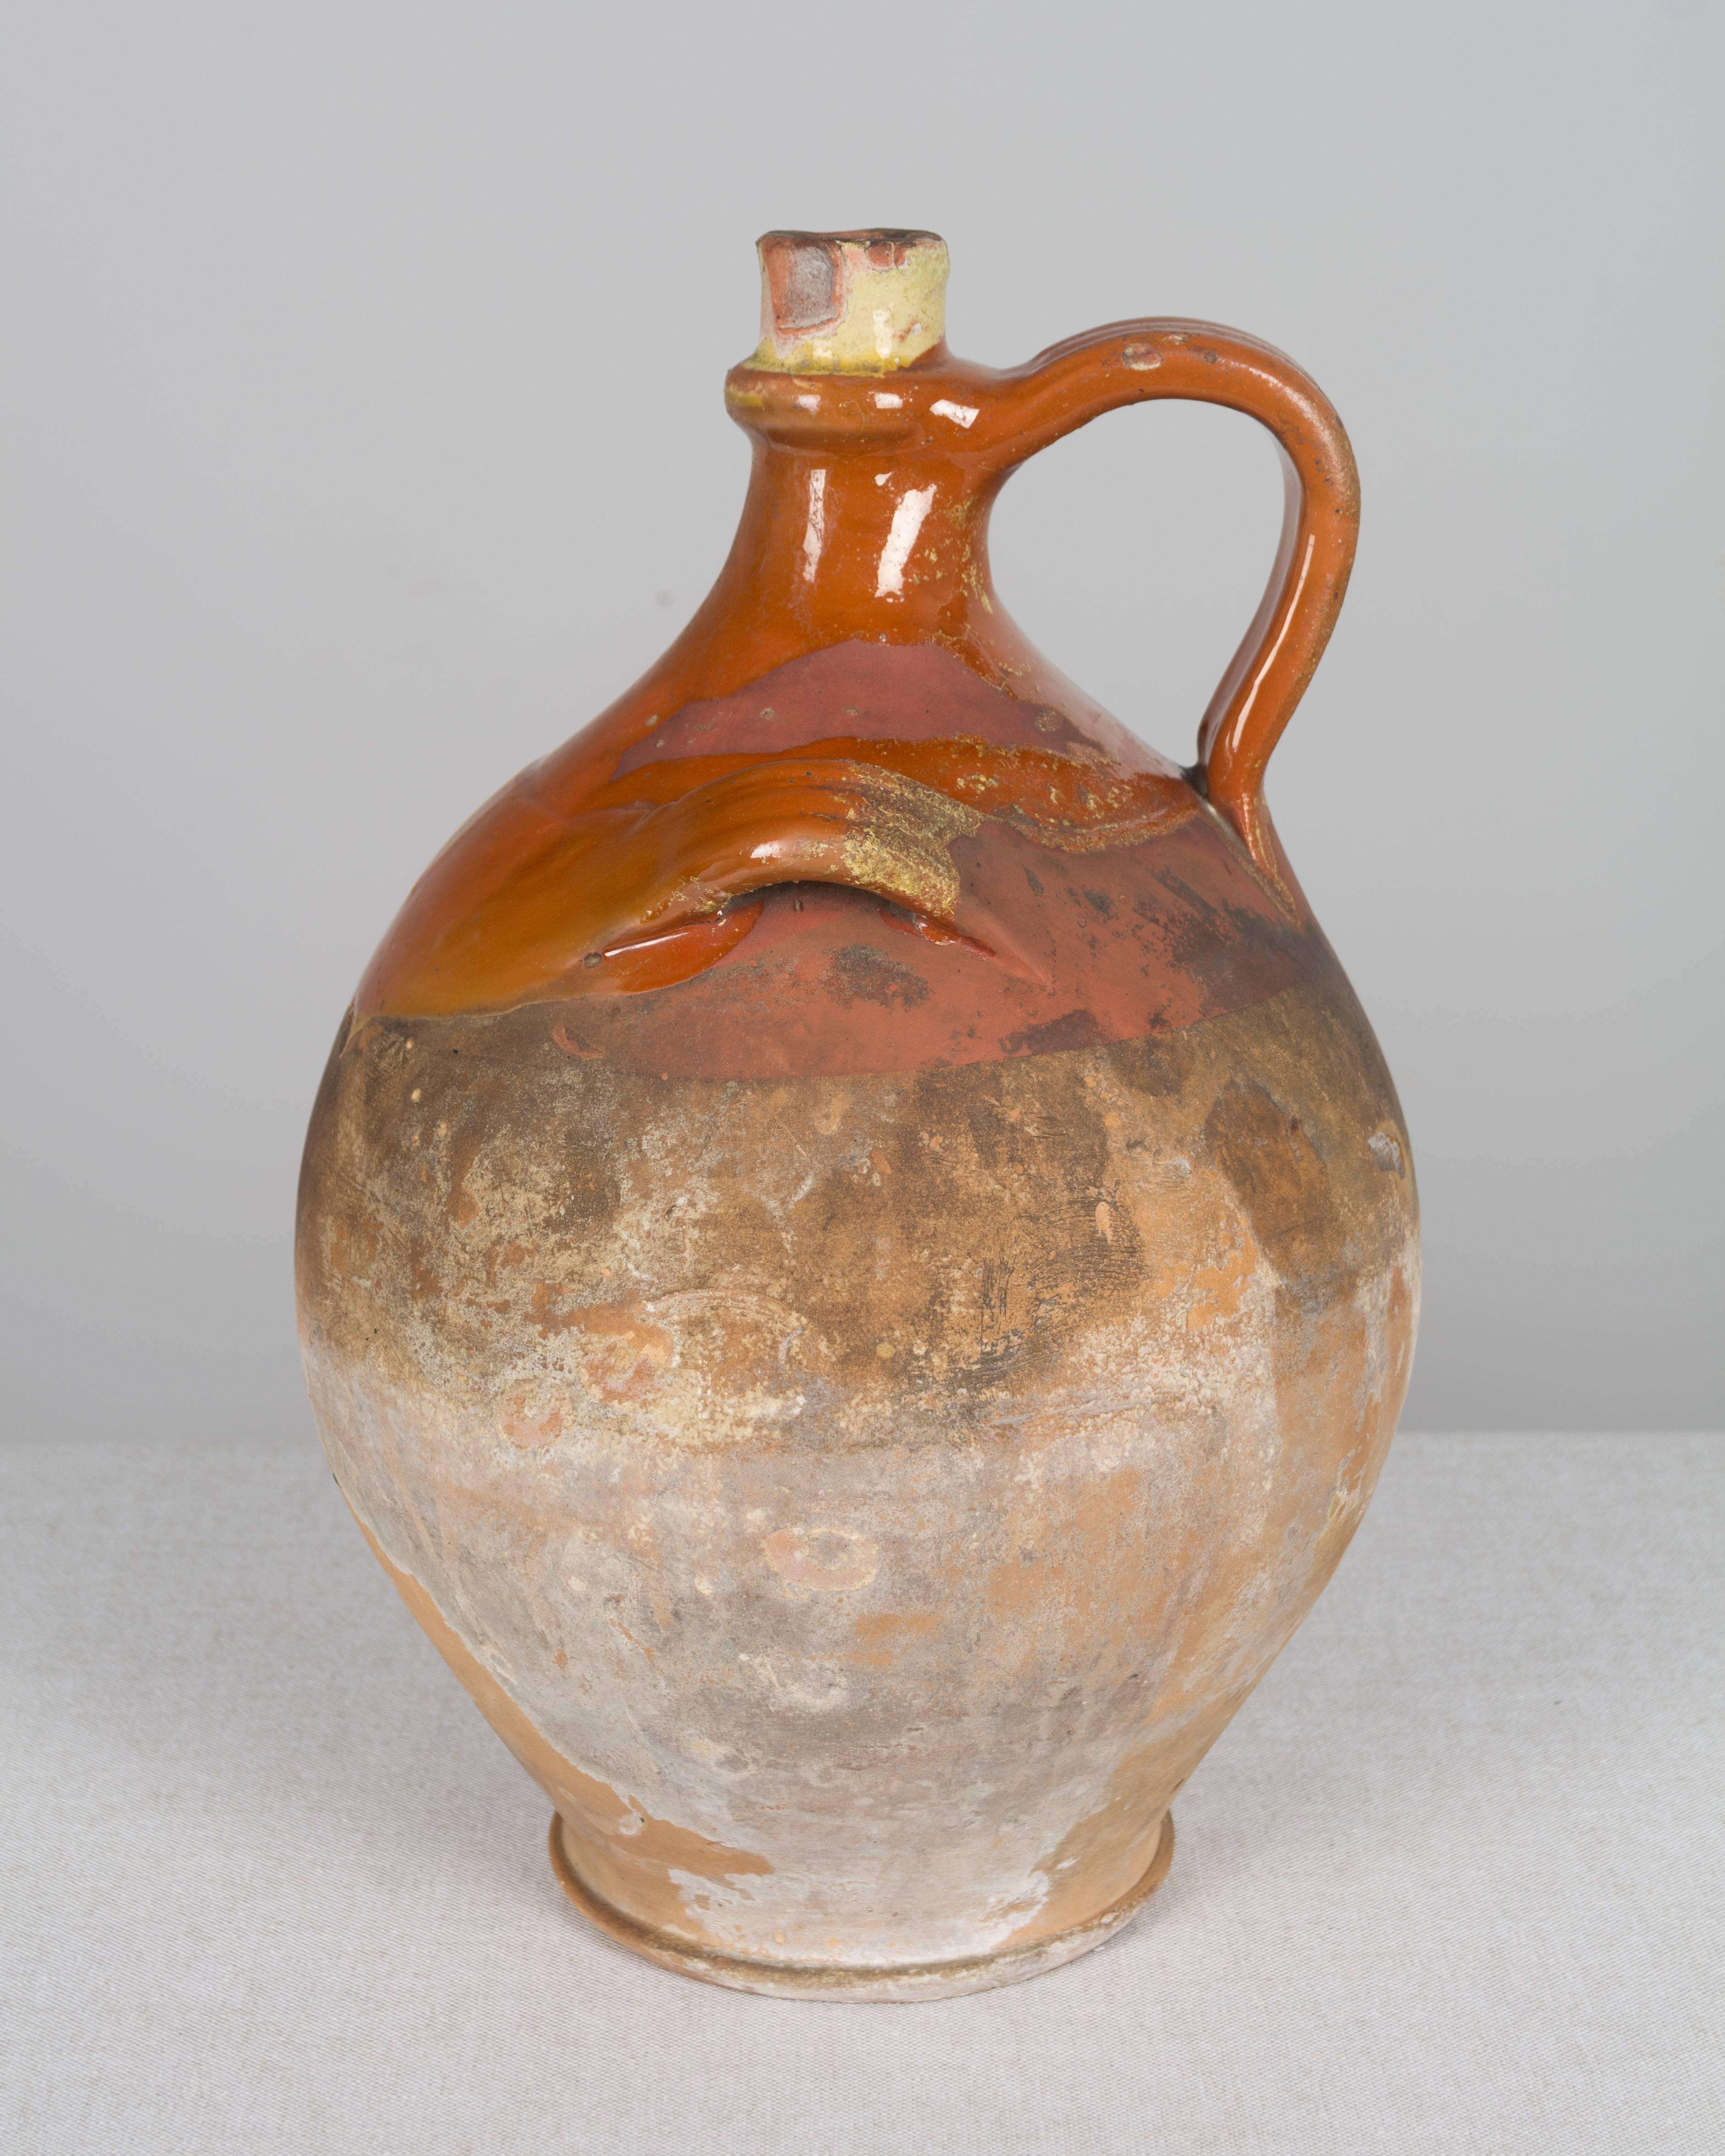 A 19th century French terracotta jug from the Southwest of France, circa 1880-1900. Measure: 14